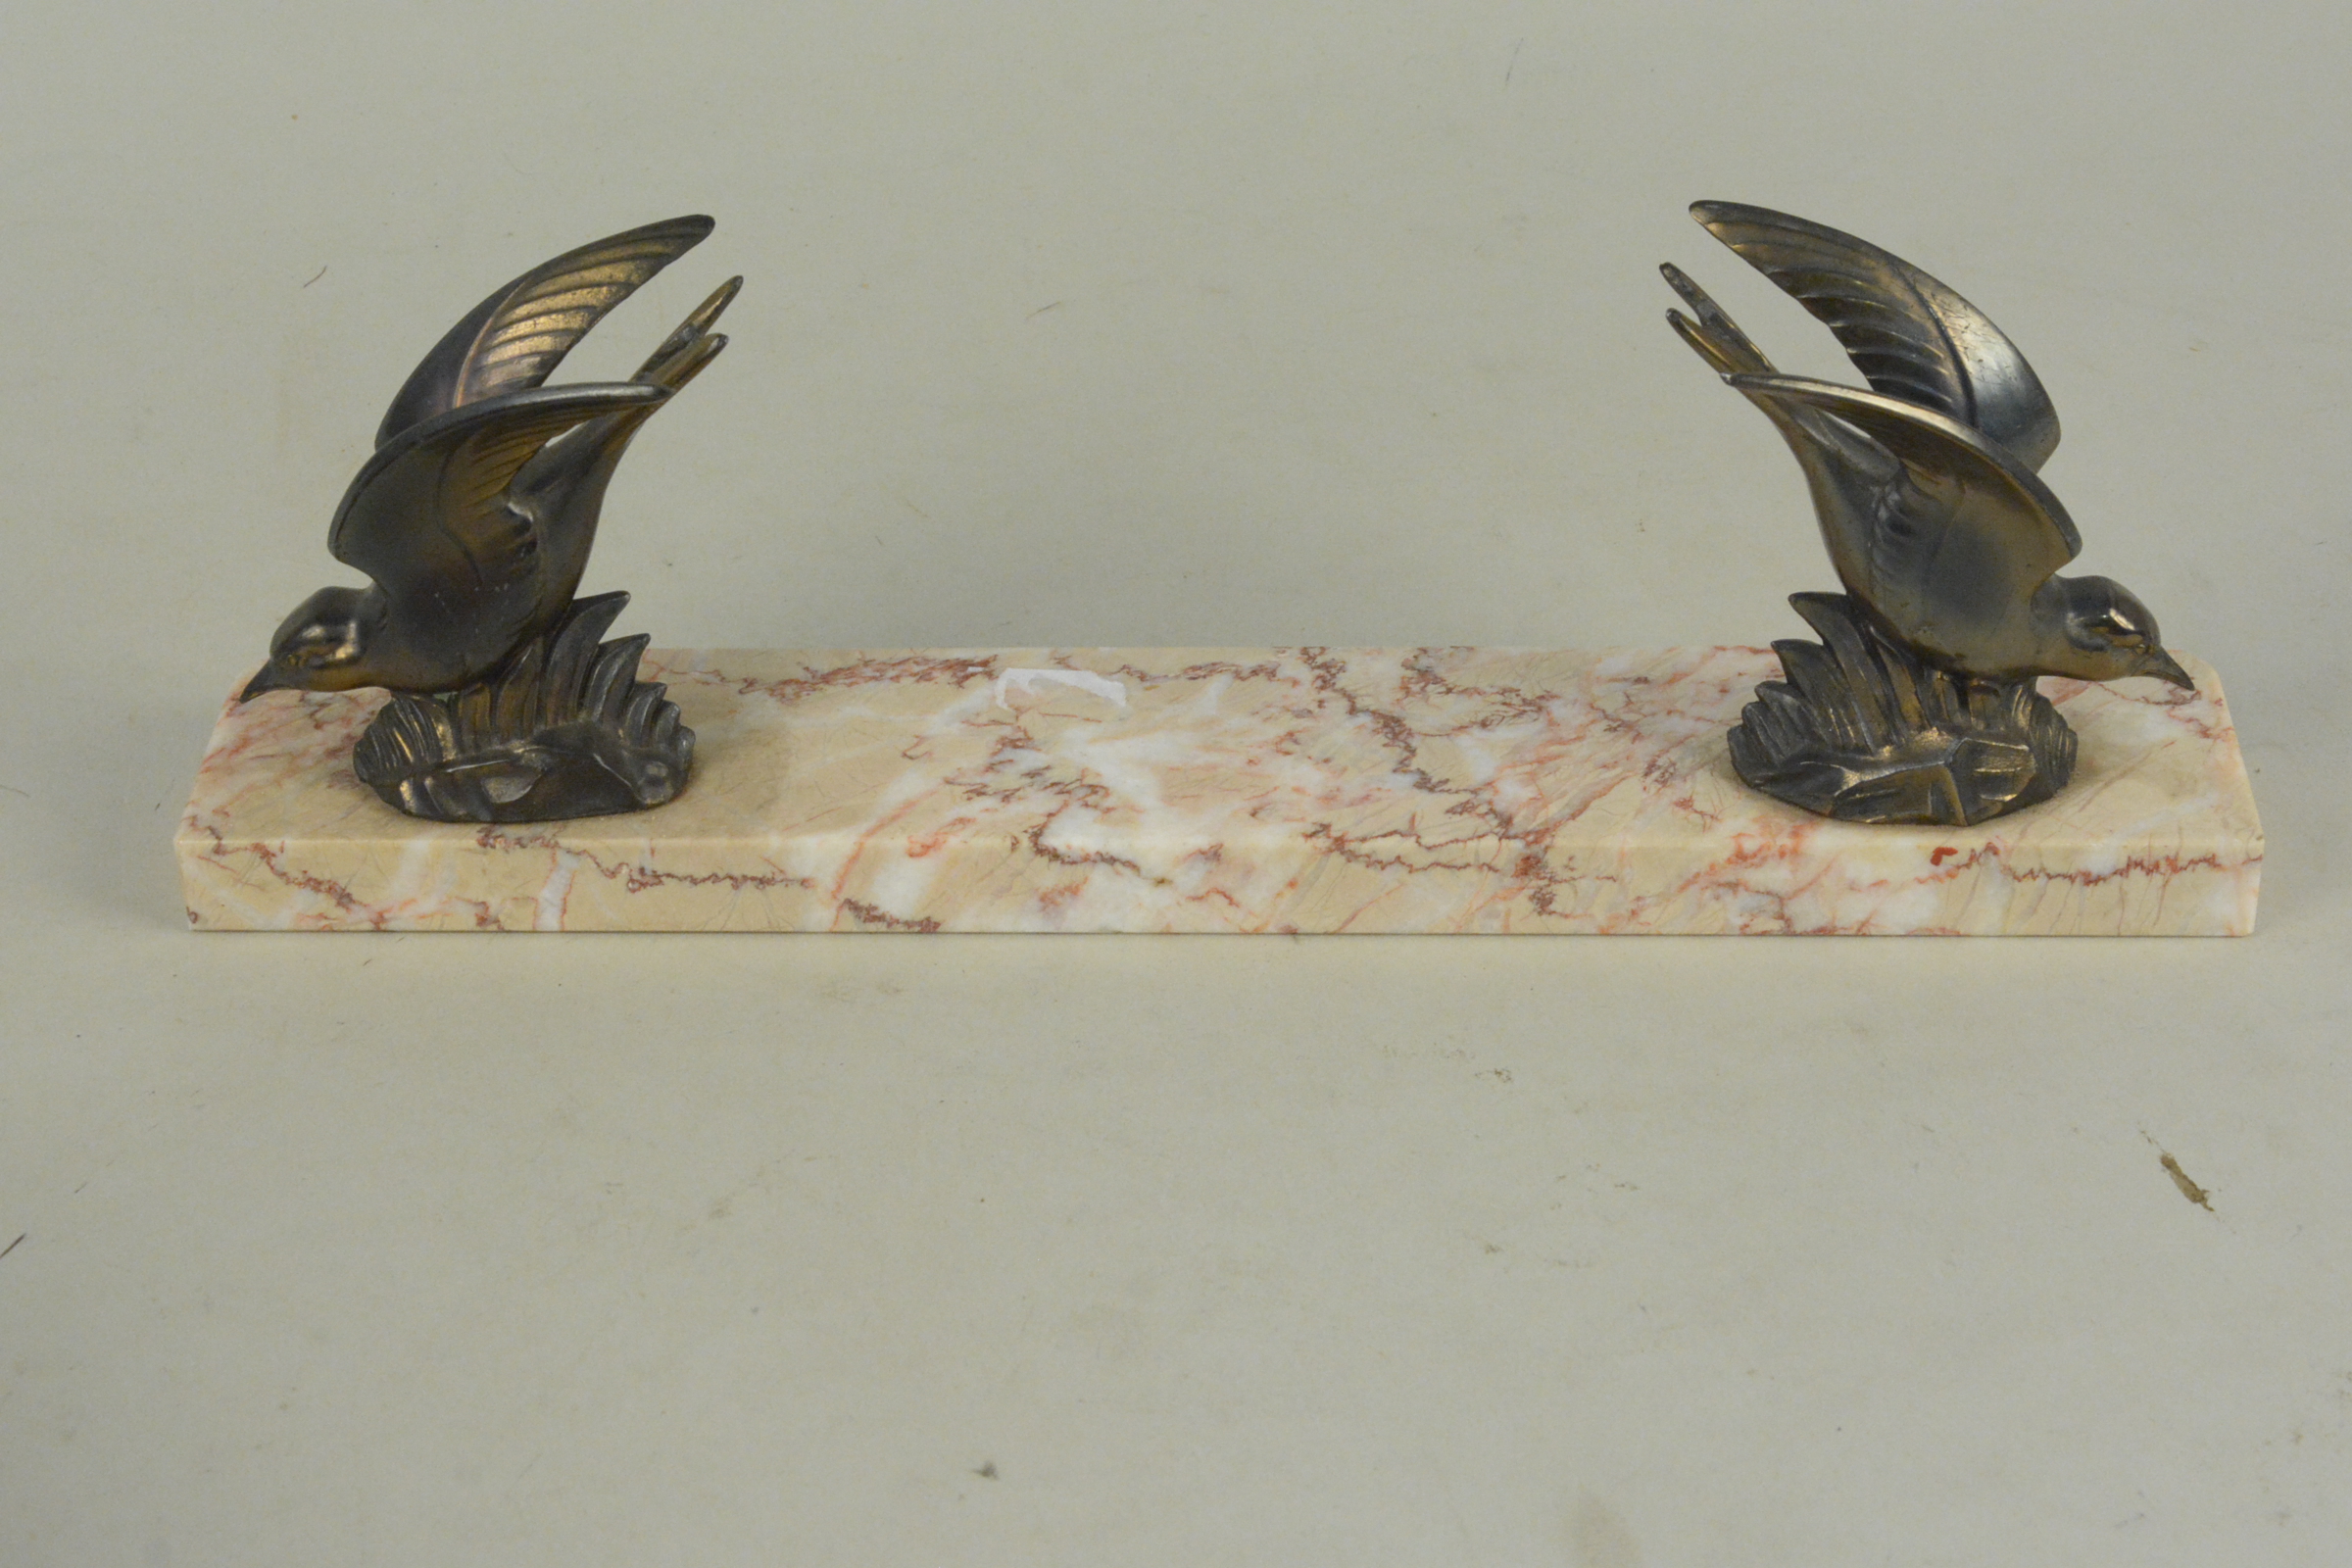 A vintage Italian Sorrento ware jewellery puzzle box decorated with birds and a lute on the top, - Image 2 of 3